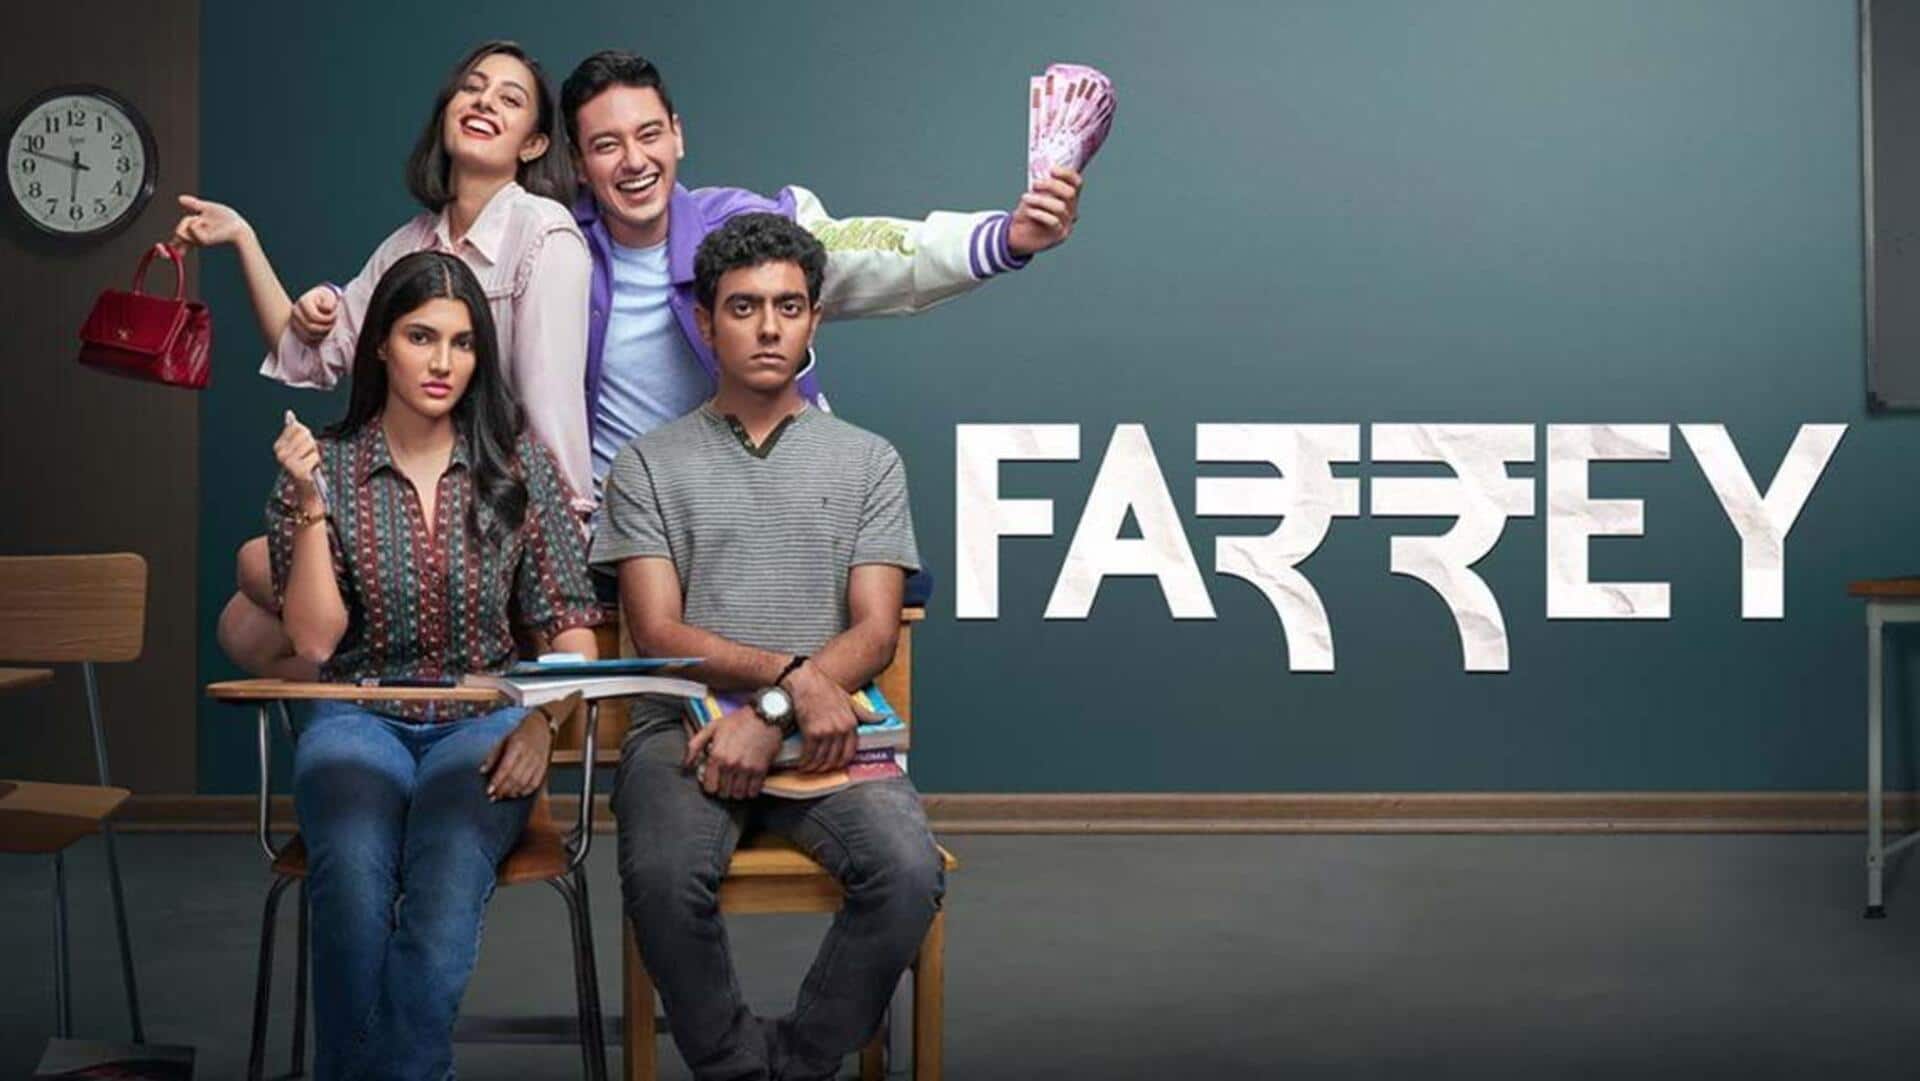 Box office collection: 'Farrey' shows poor chance of revival